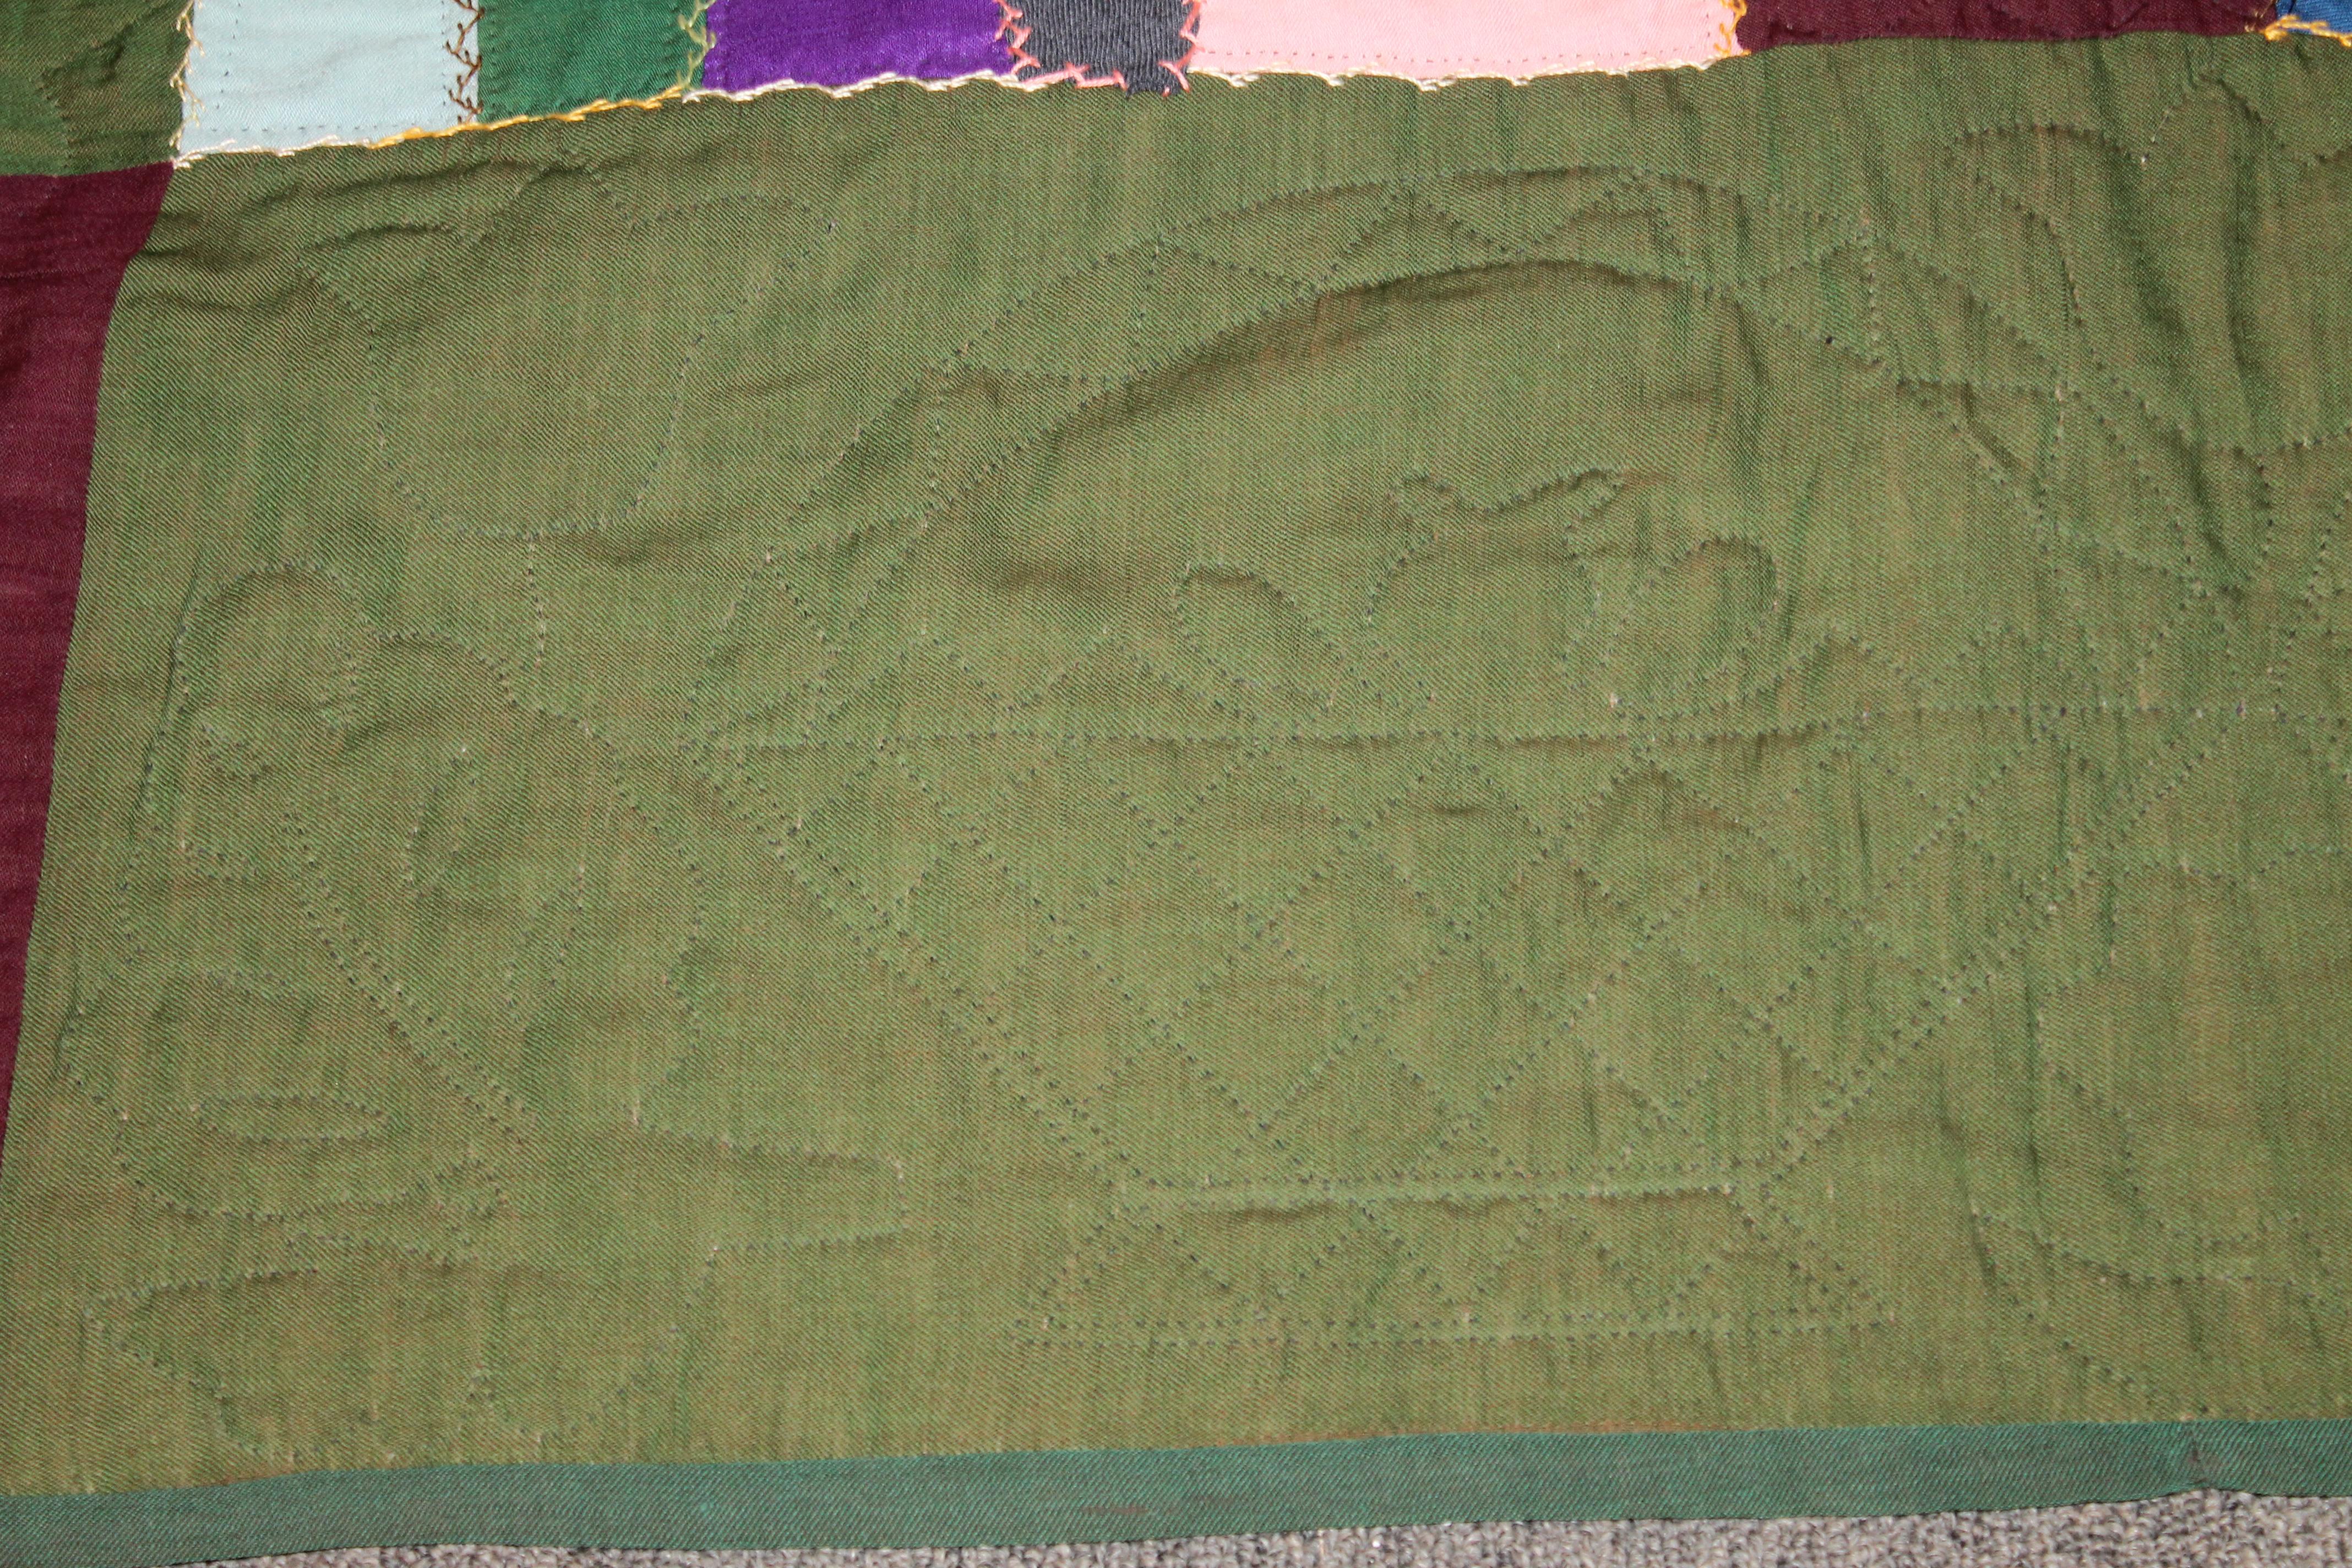 Hand-Crafted Amish 1920s Wool Contained Crazy Quilt Lancaster Co.Pa. For Sale